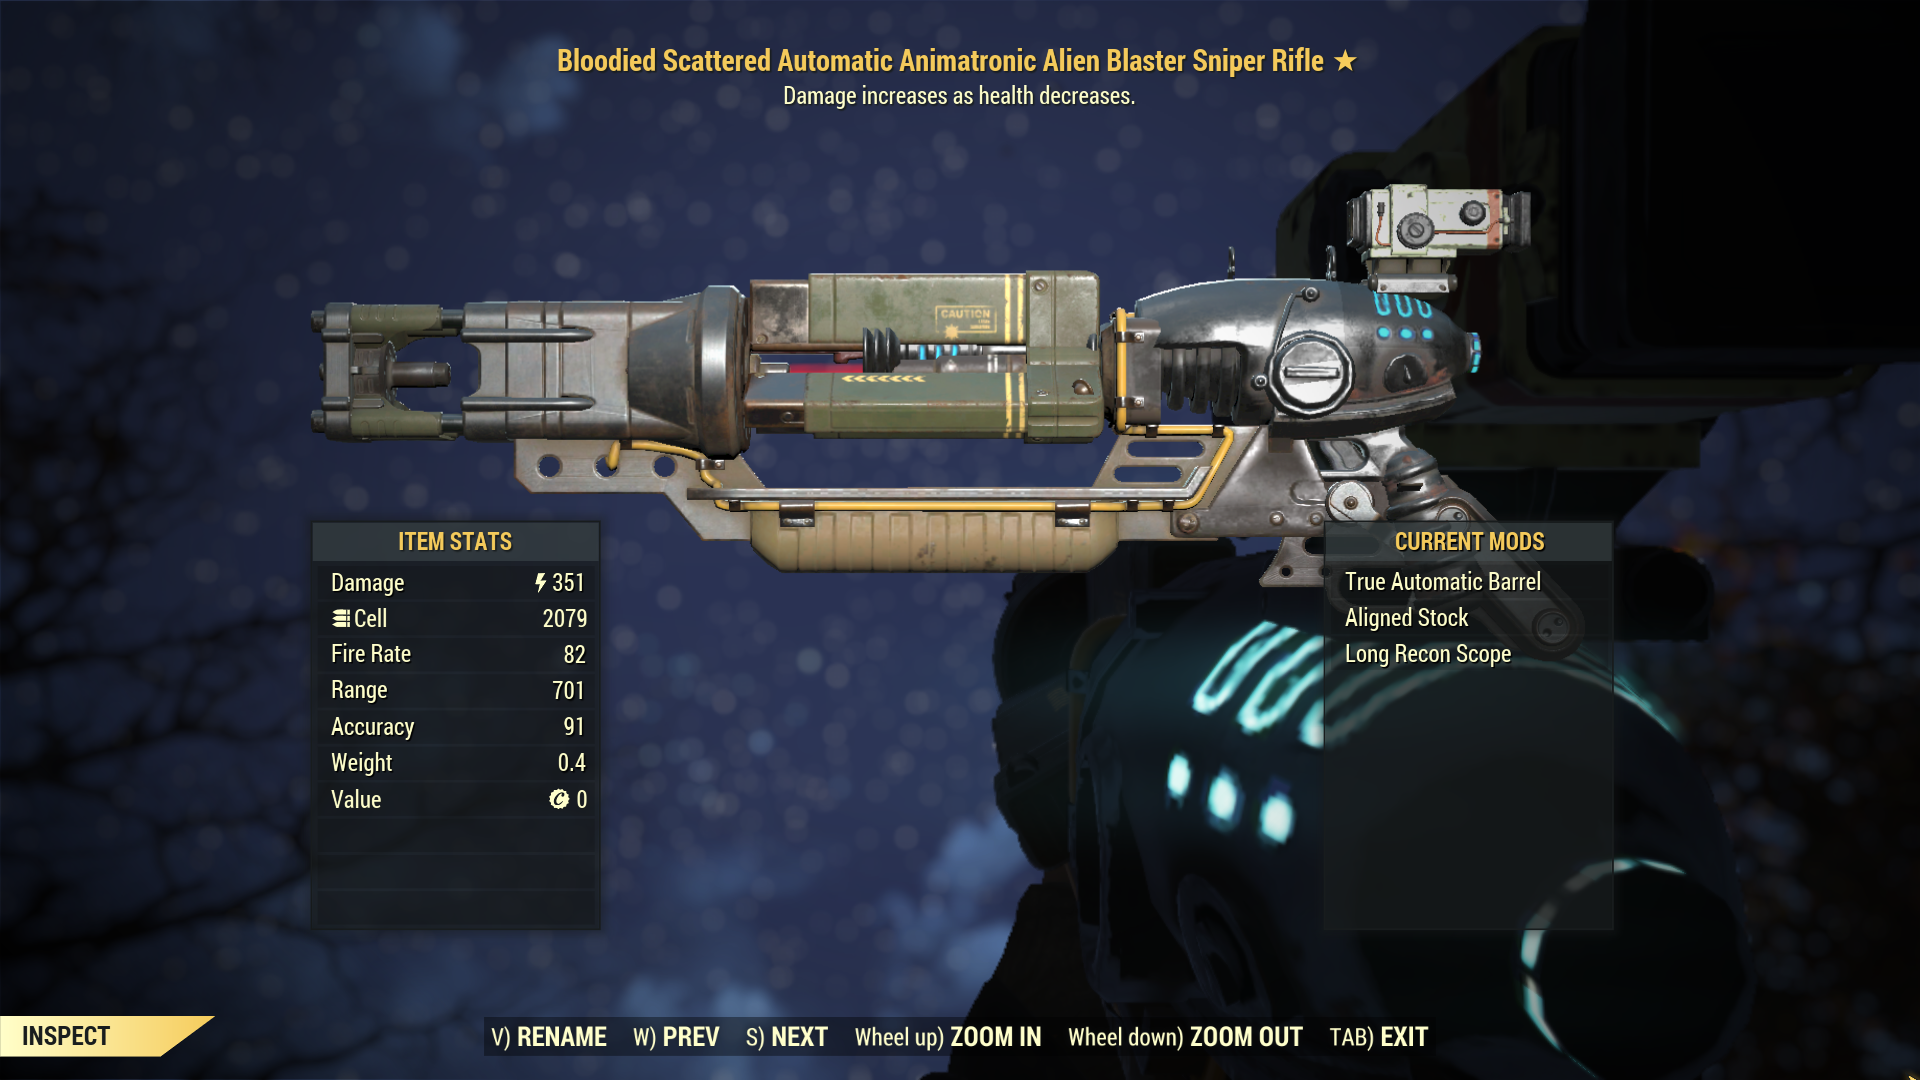 [NEW GLITCHED WEAPON] ★★★ Bloodied Animatronic Alien Blaster Rifle | DOESN'T BREAK | FAST DELIVERY |